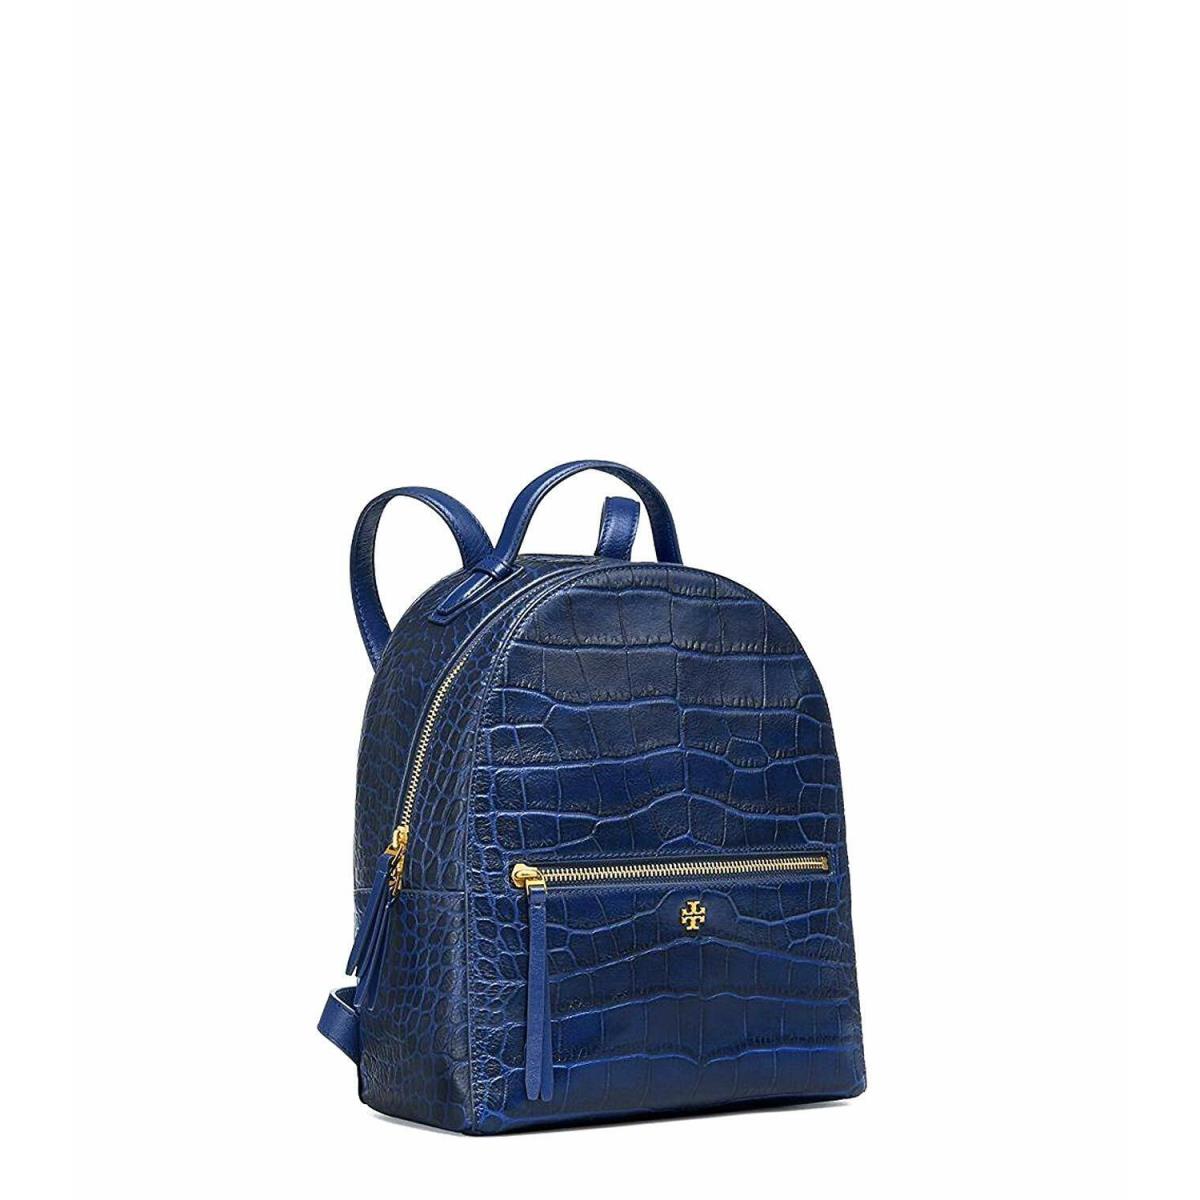 Tory Burch Women`s Navy Blue Croc-embossed Leather Mini Backpack Book Bag 8247-2